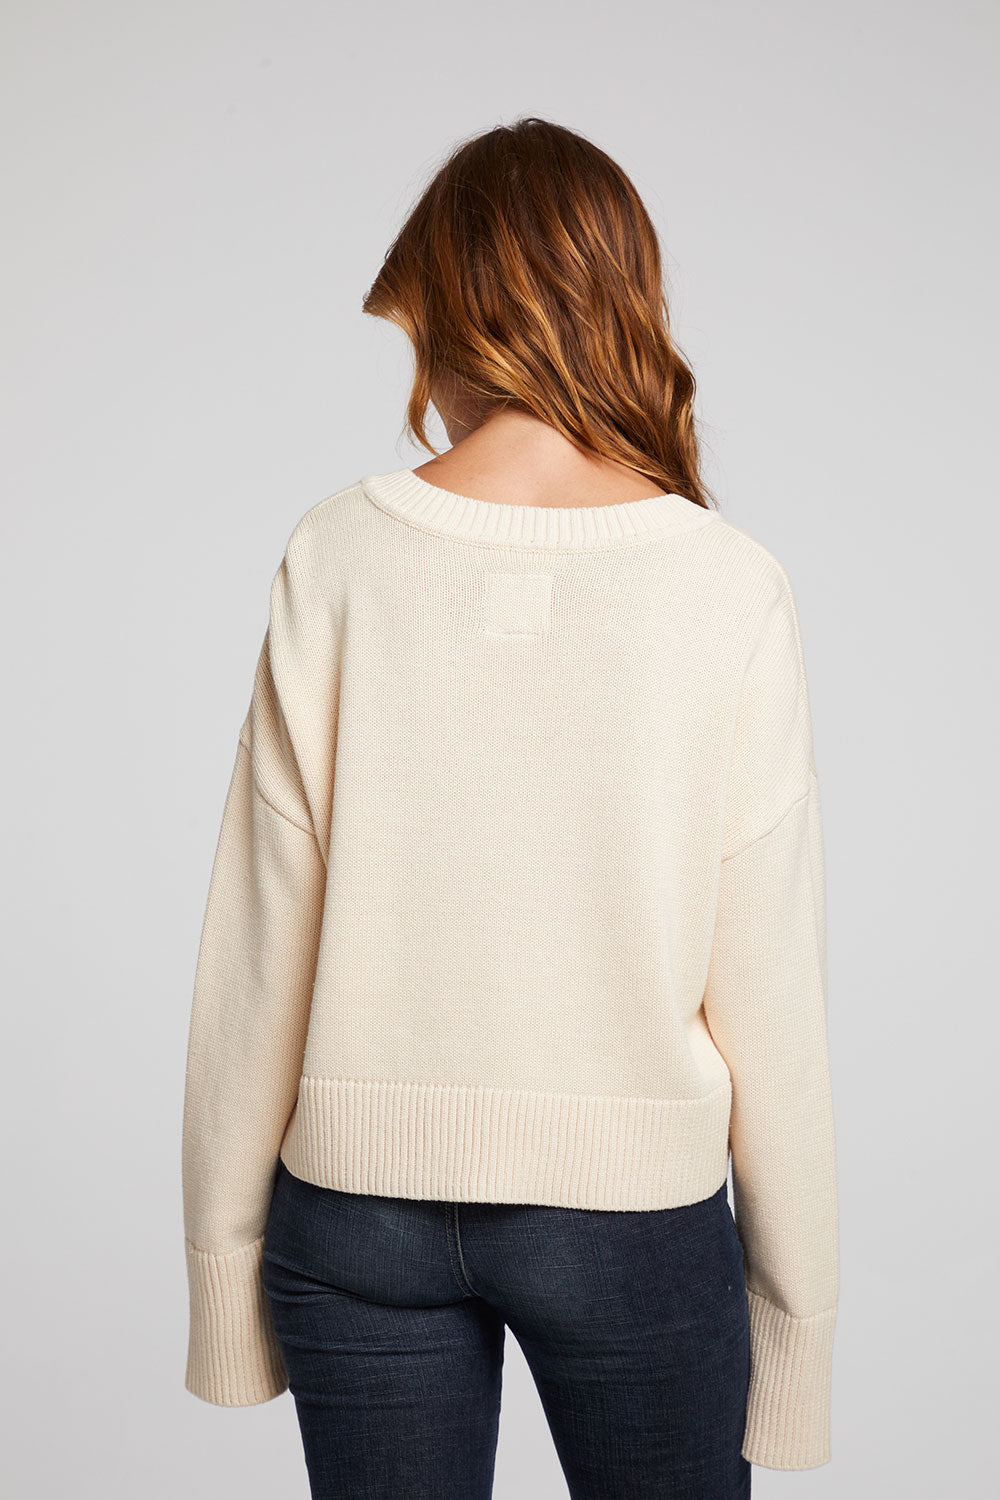 Bolinas Whitecap Grey Pullover WOMENS chaserbrand